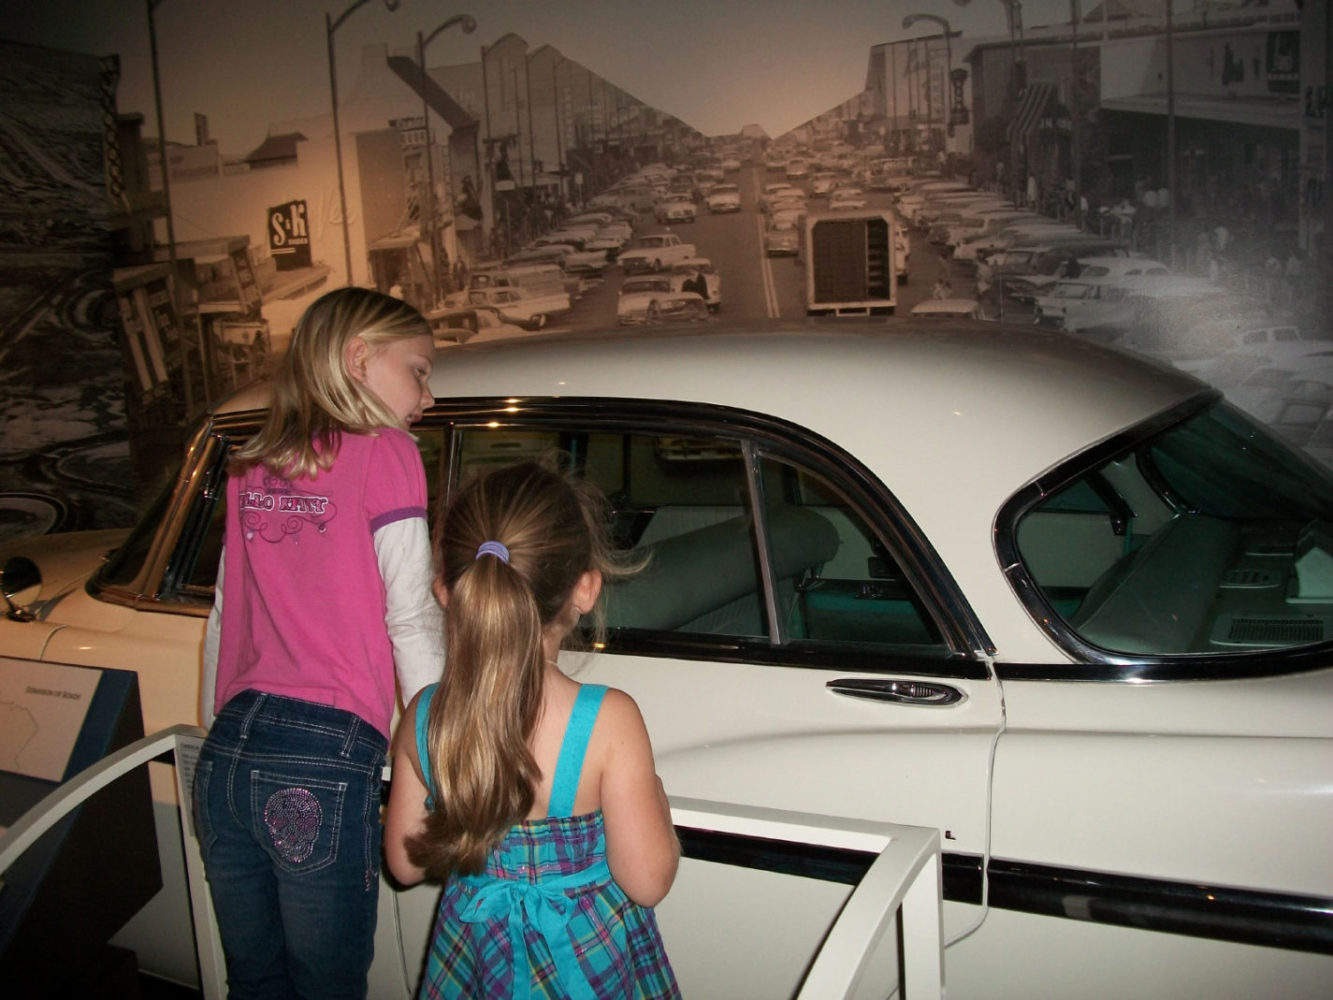 Students view the exhibit Journey to Work as part of Getting from Here to There school program at the San Mateo County History Museum